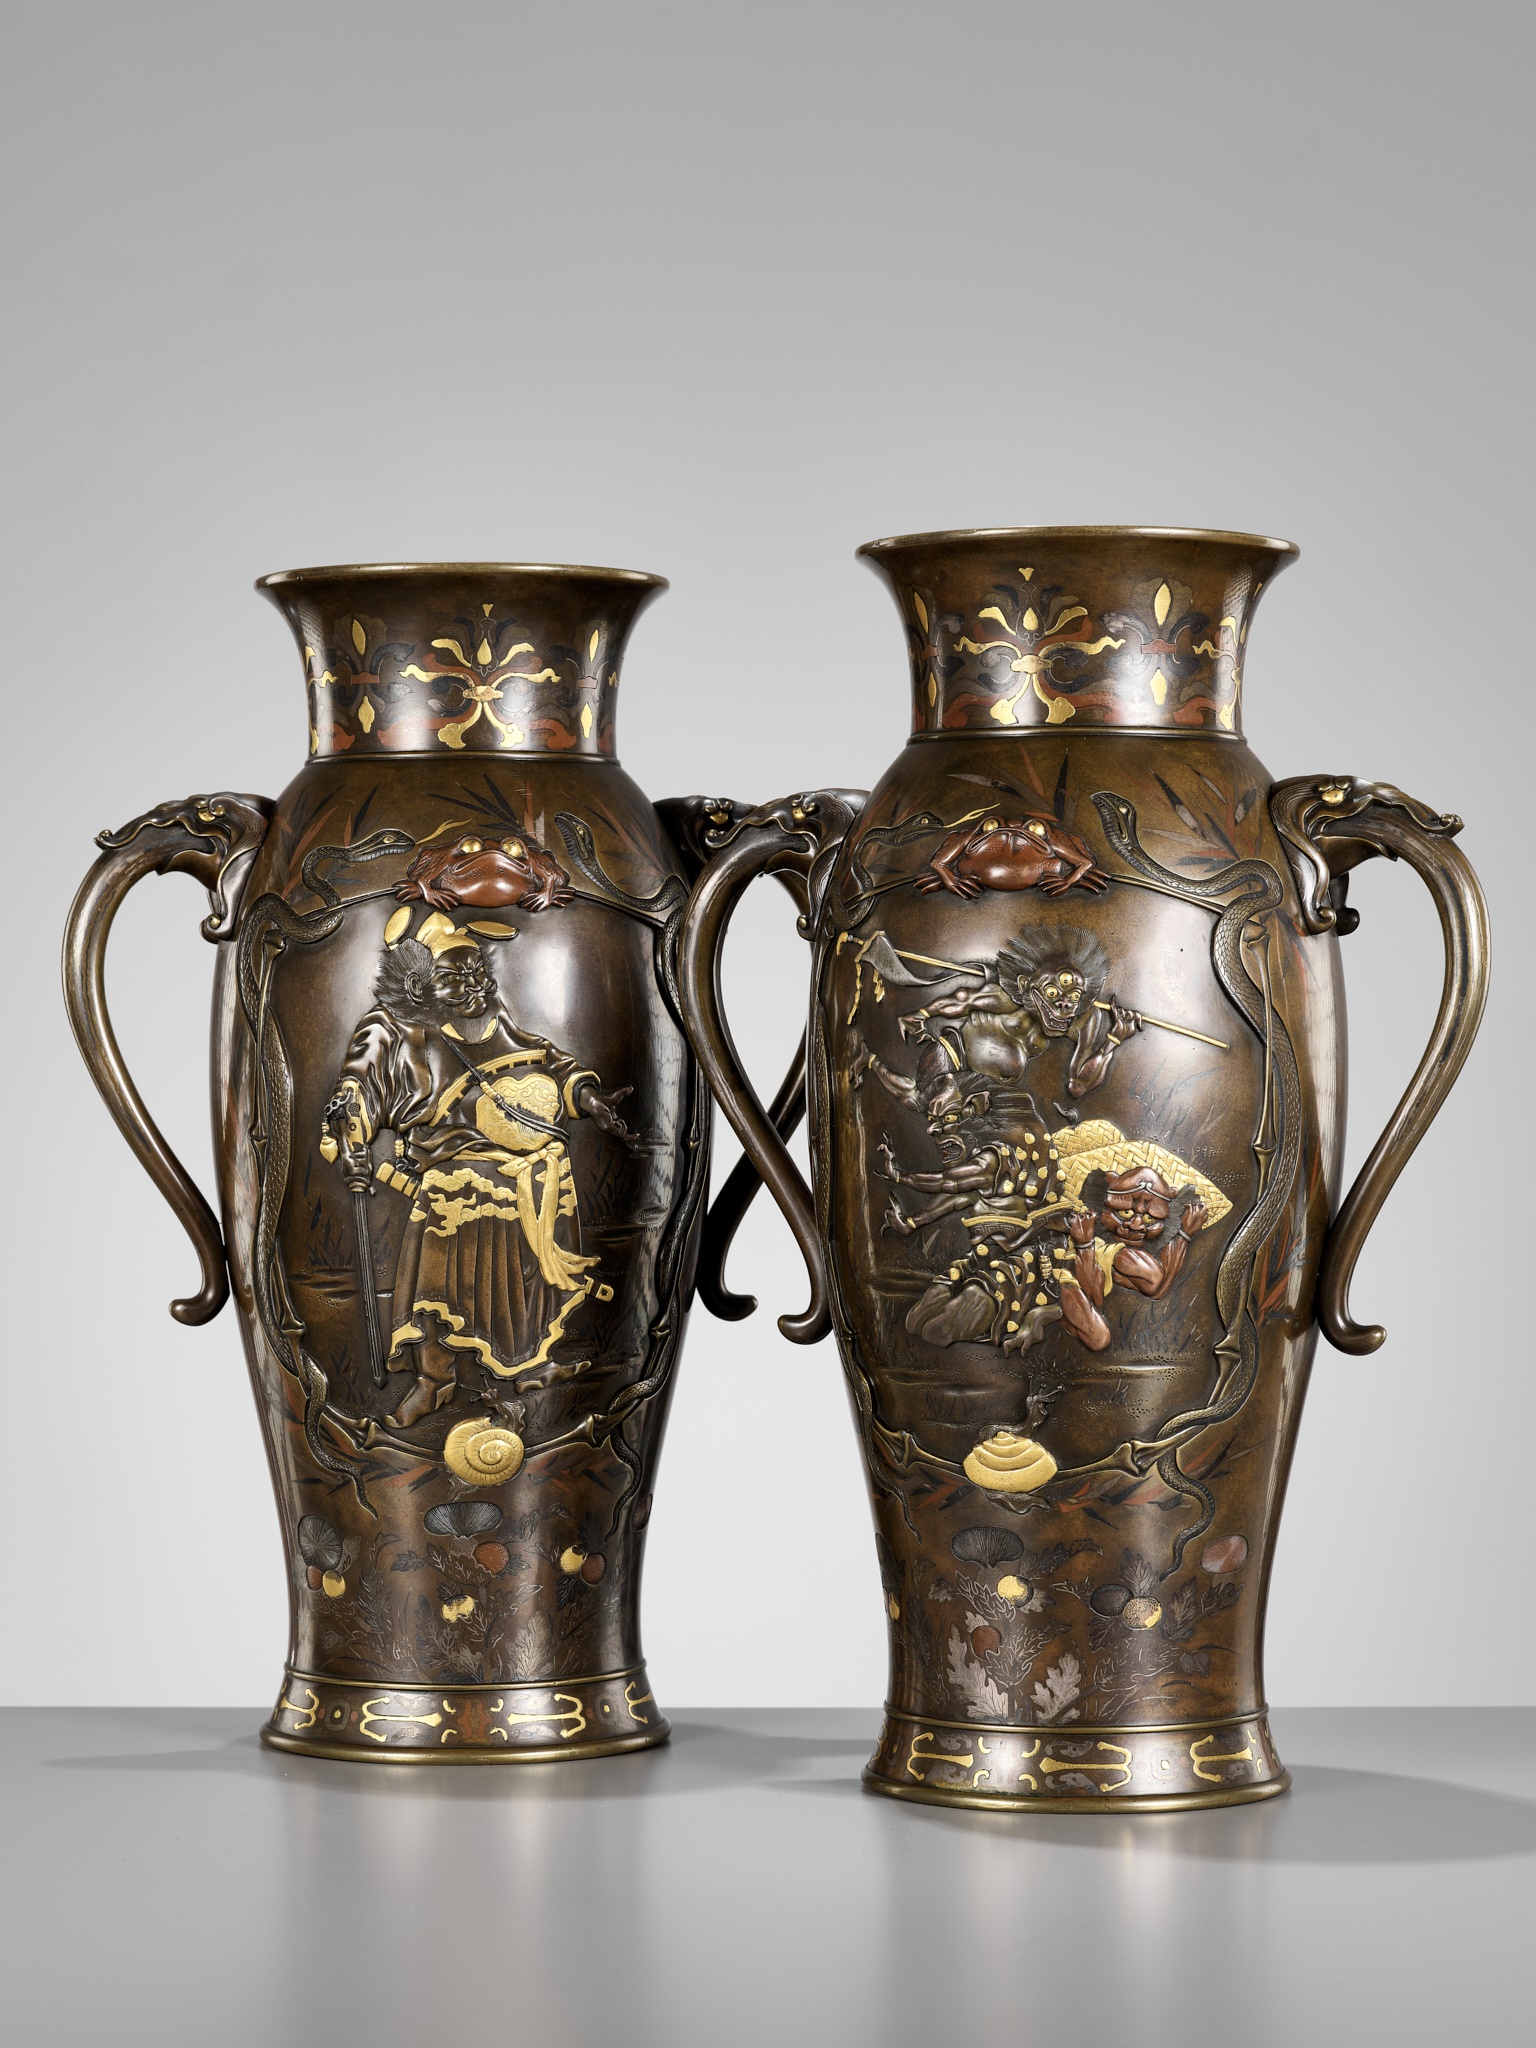 A SUPERB PAIR OF MIYAO-STYLE MIXED-METAL-INLAID AND PARCEL-GILT BRONZE VASES WITH SHOKI AND ONI - Image 2 of 15